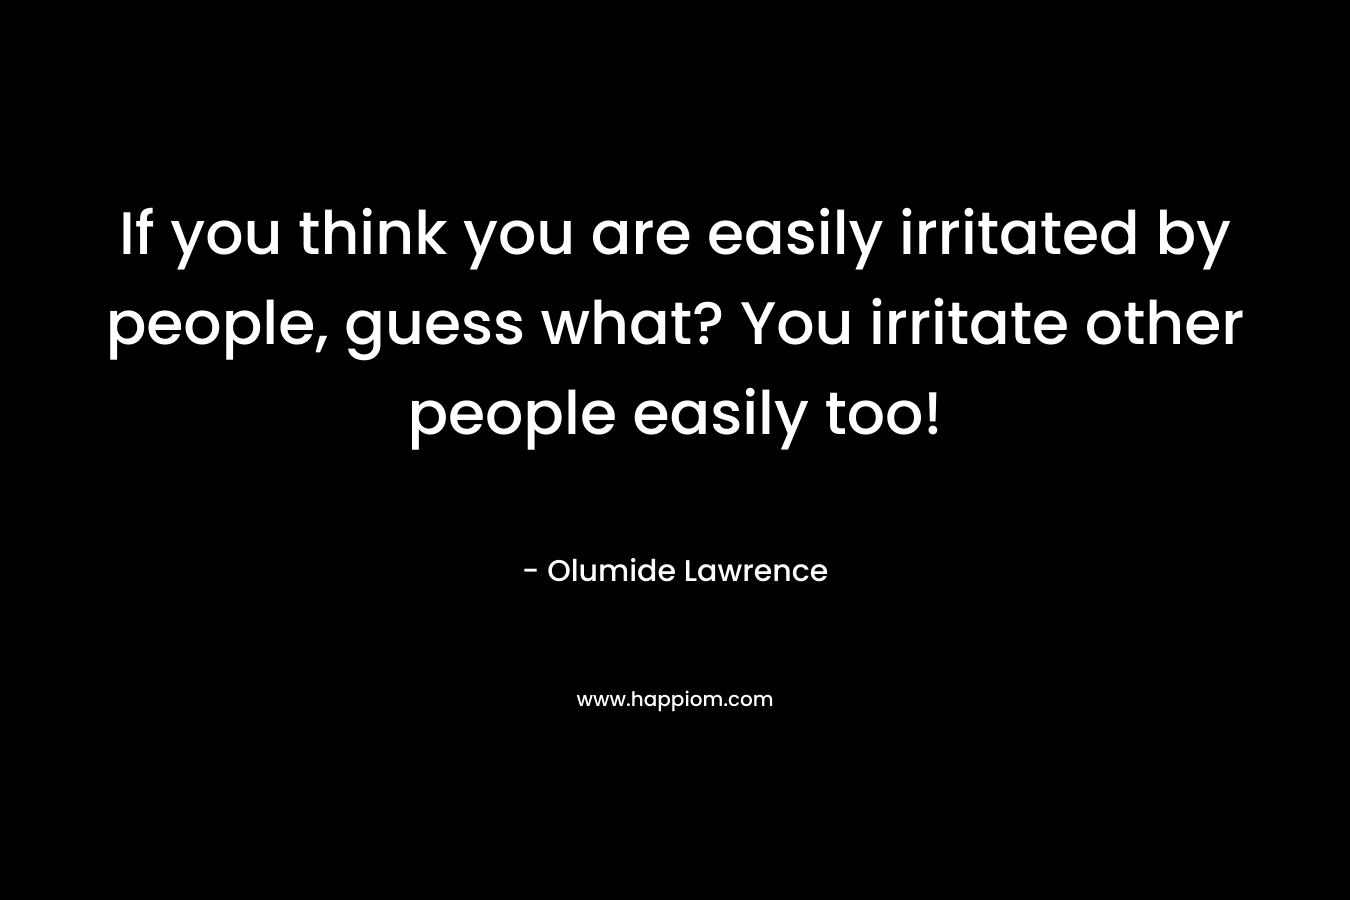 If you think you are easily irritated by people, guess what? You irritate other people easily too! – Olumide Lawrence